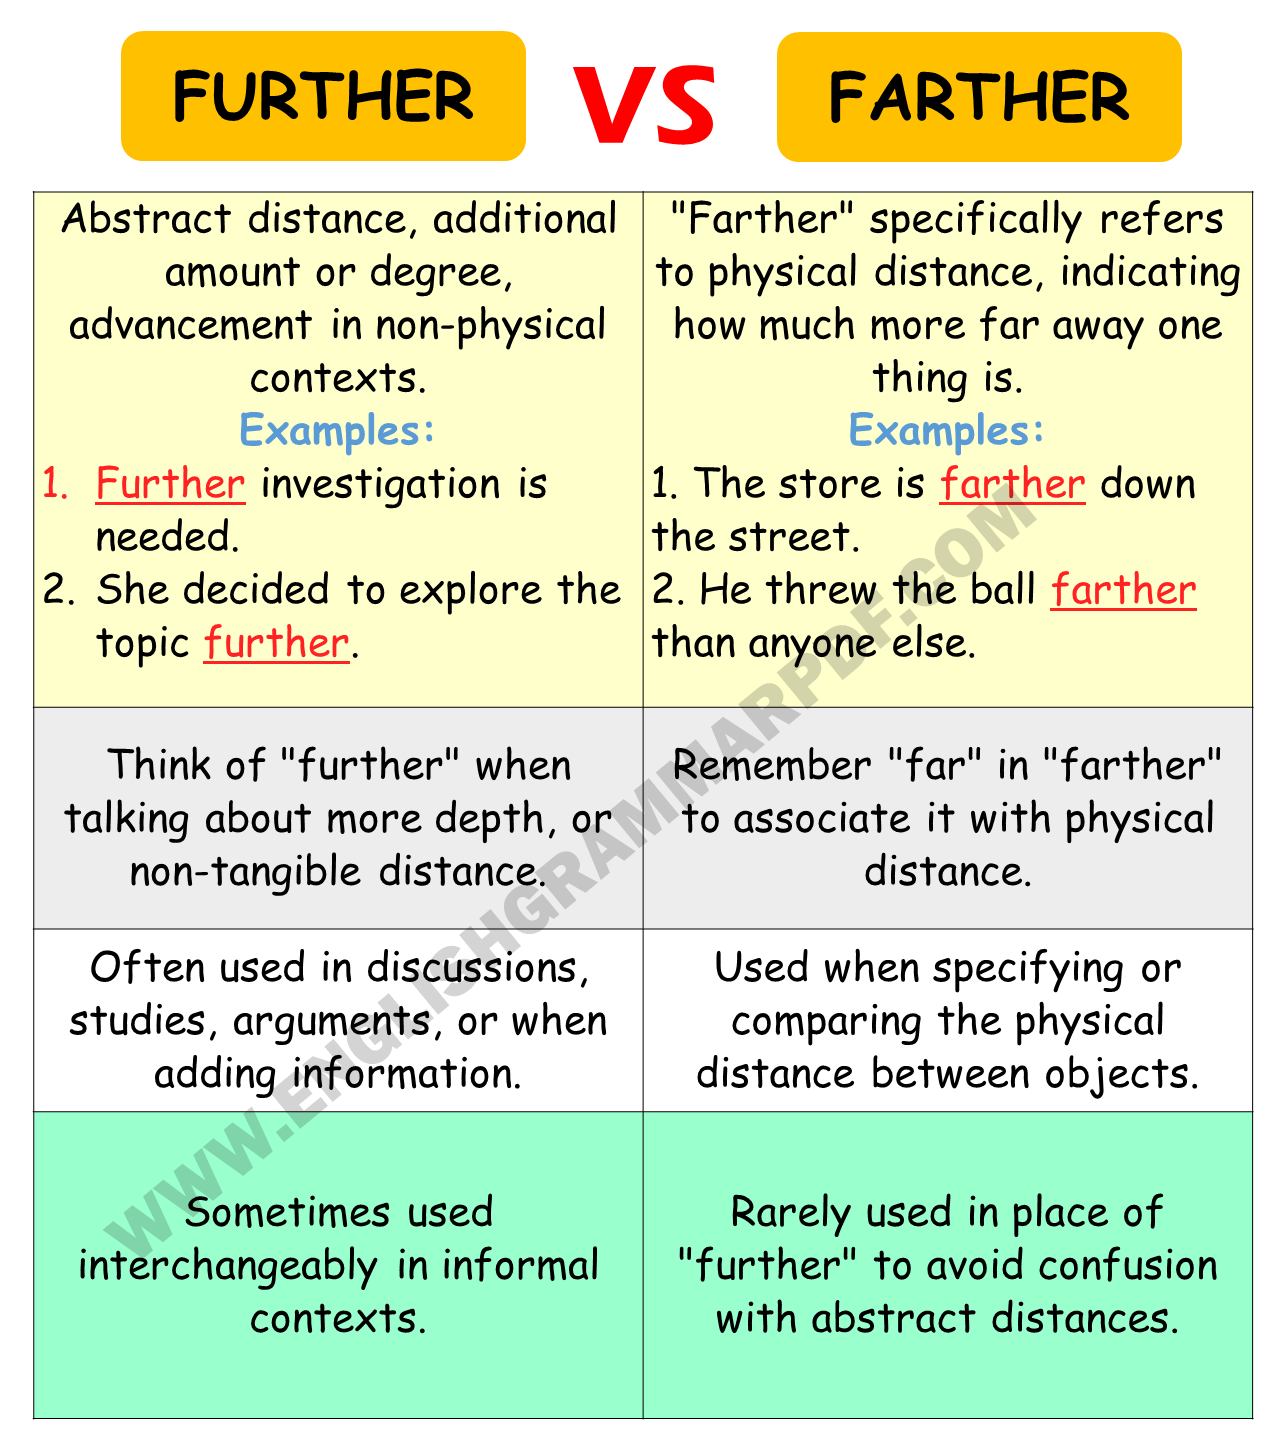 FURTHER vs FARTHER